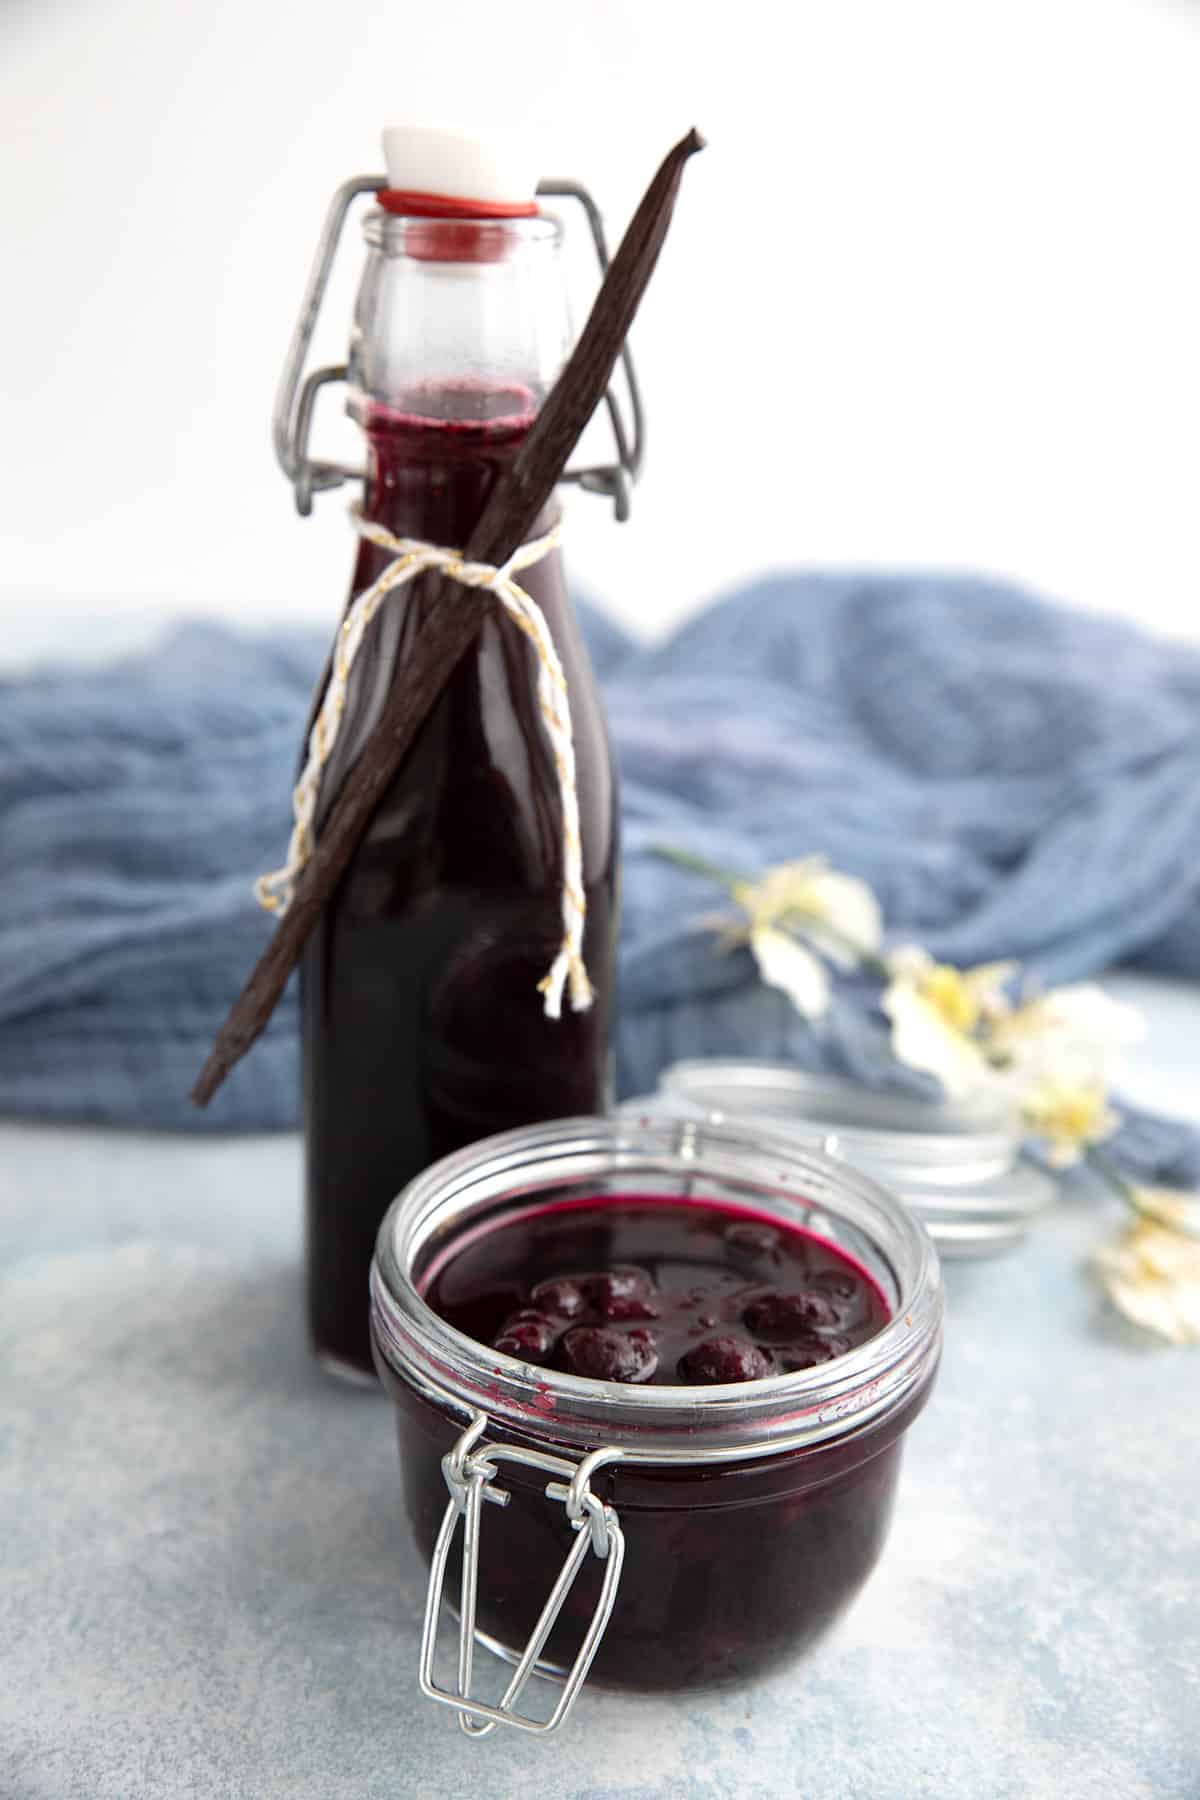 Blueberry syrup in a glass jar with a bottle in behind.